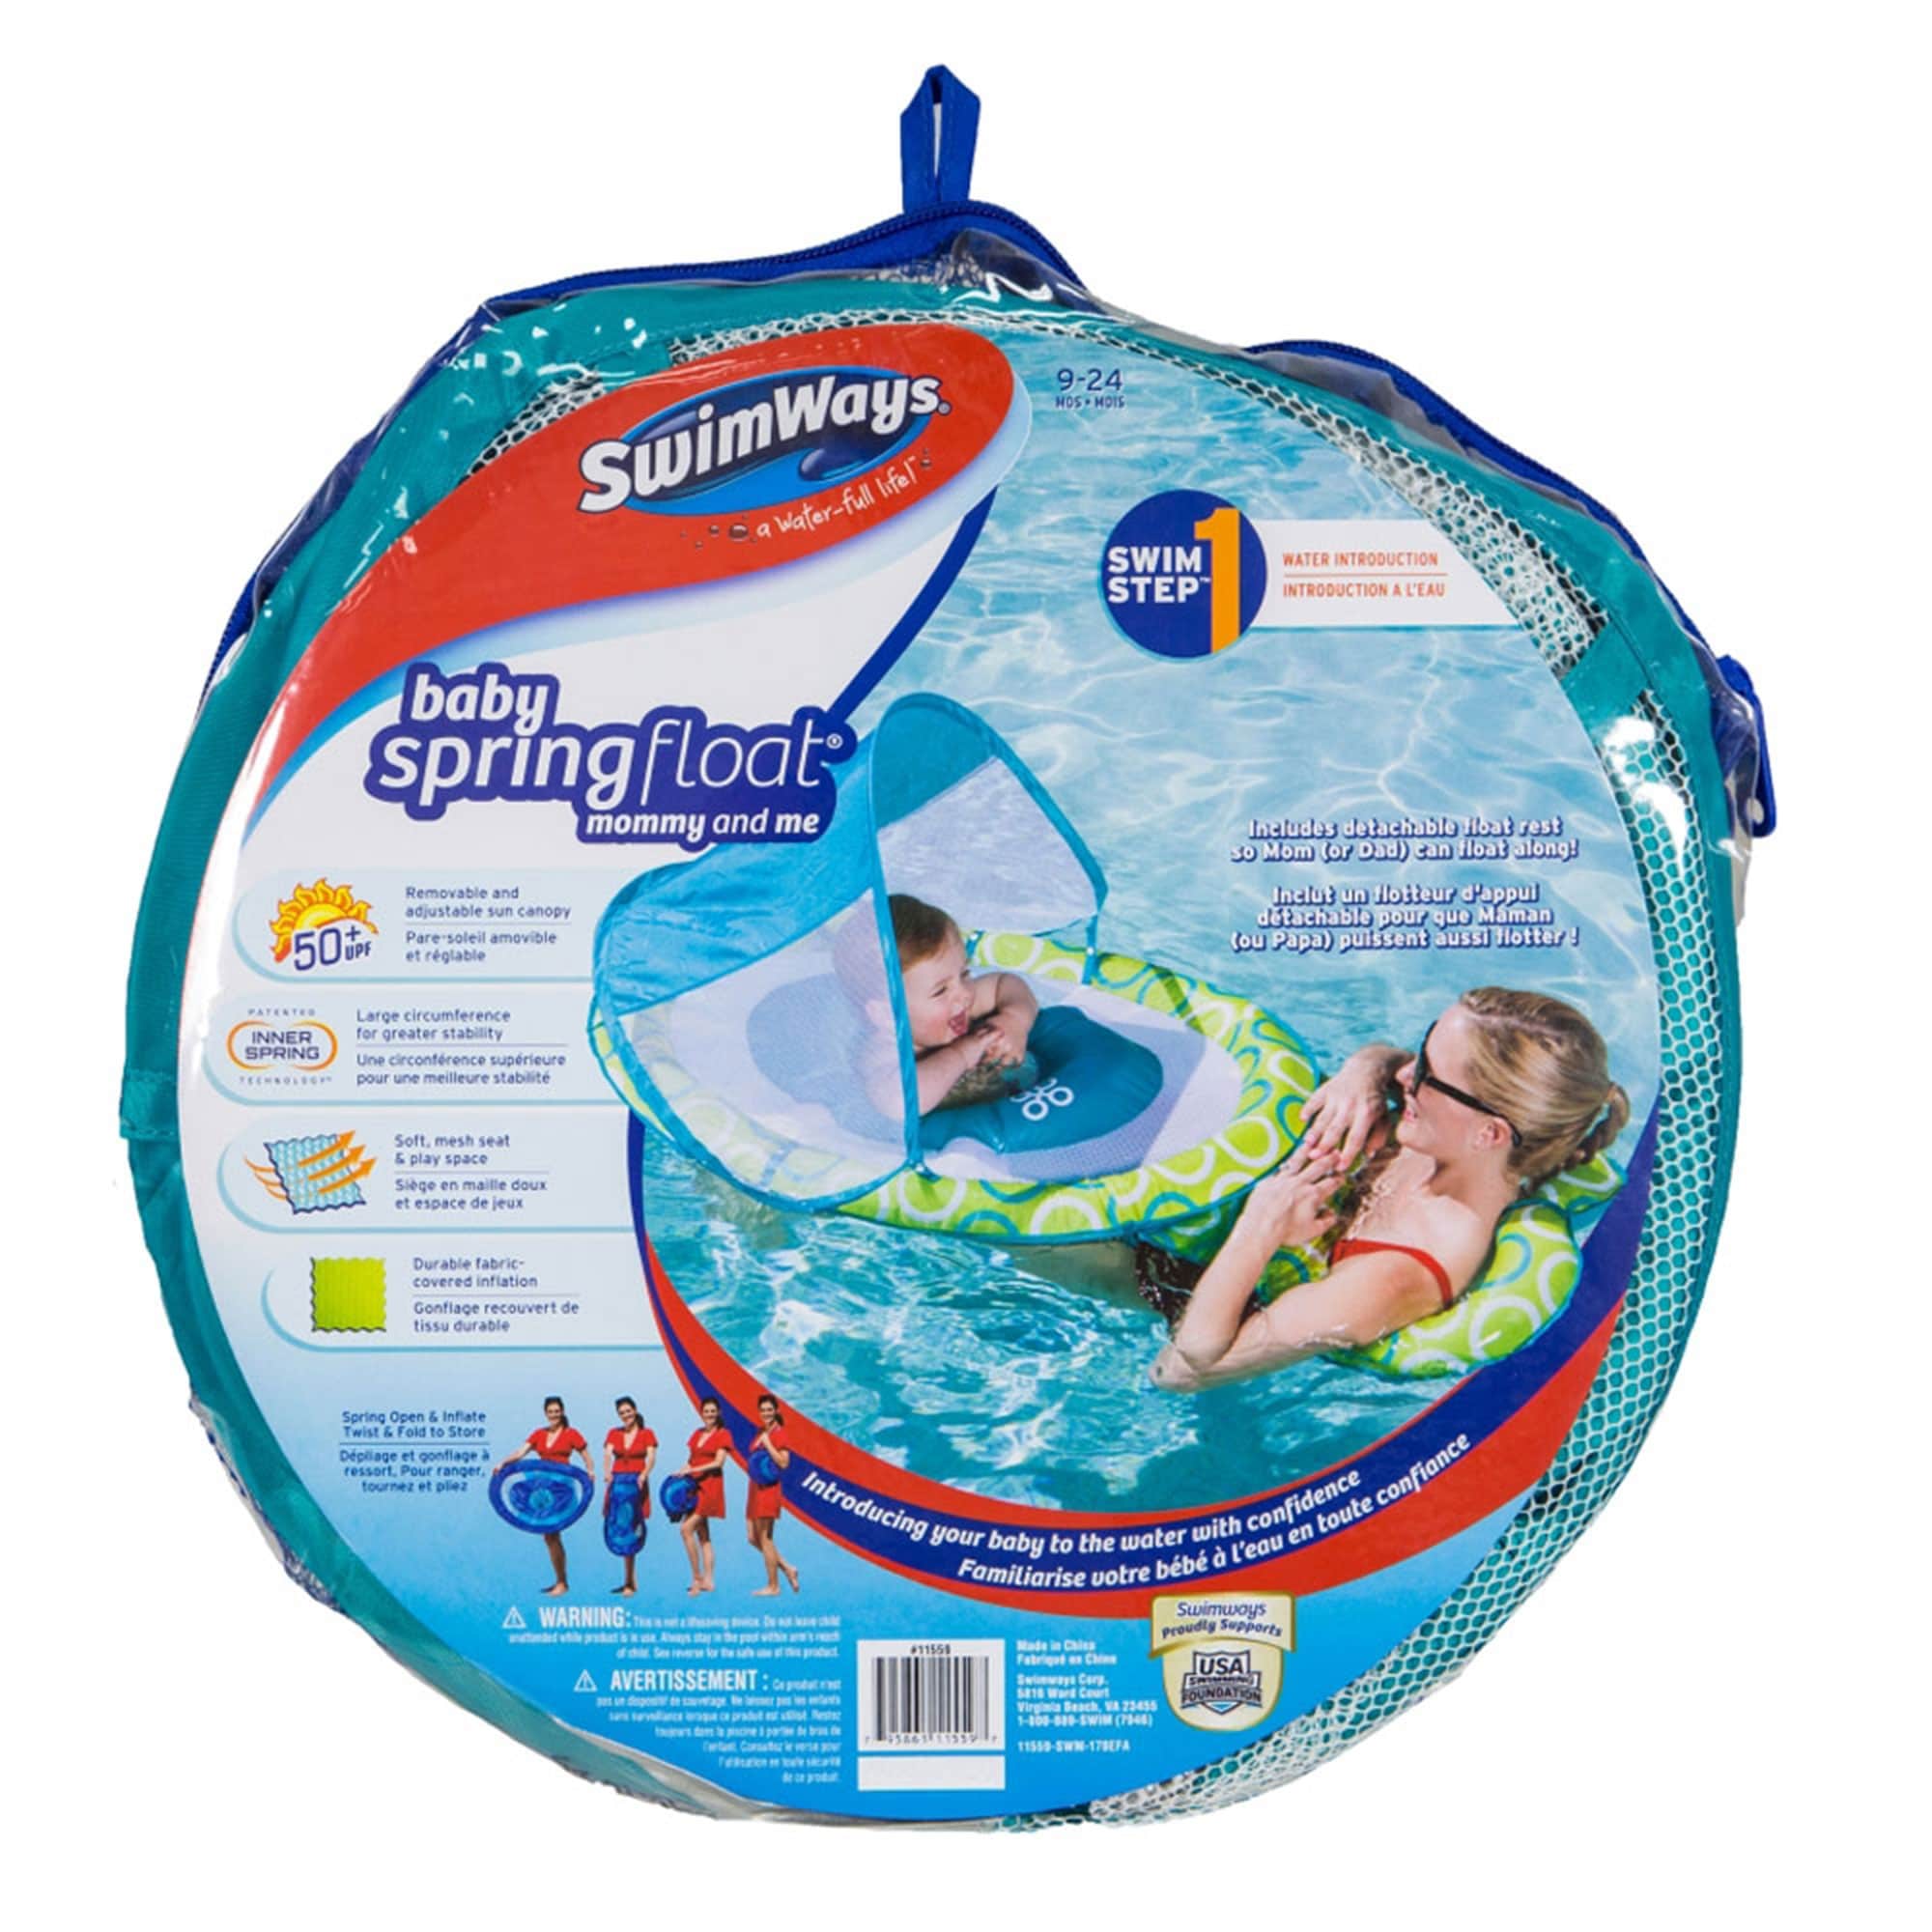 Swimways 9 to 24 Months Mommy and Me Baby Spring Float with Canopy and Mesh  Bed - 1.29 - Bed Bath & Beyond - 35462914